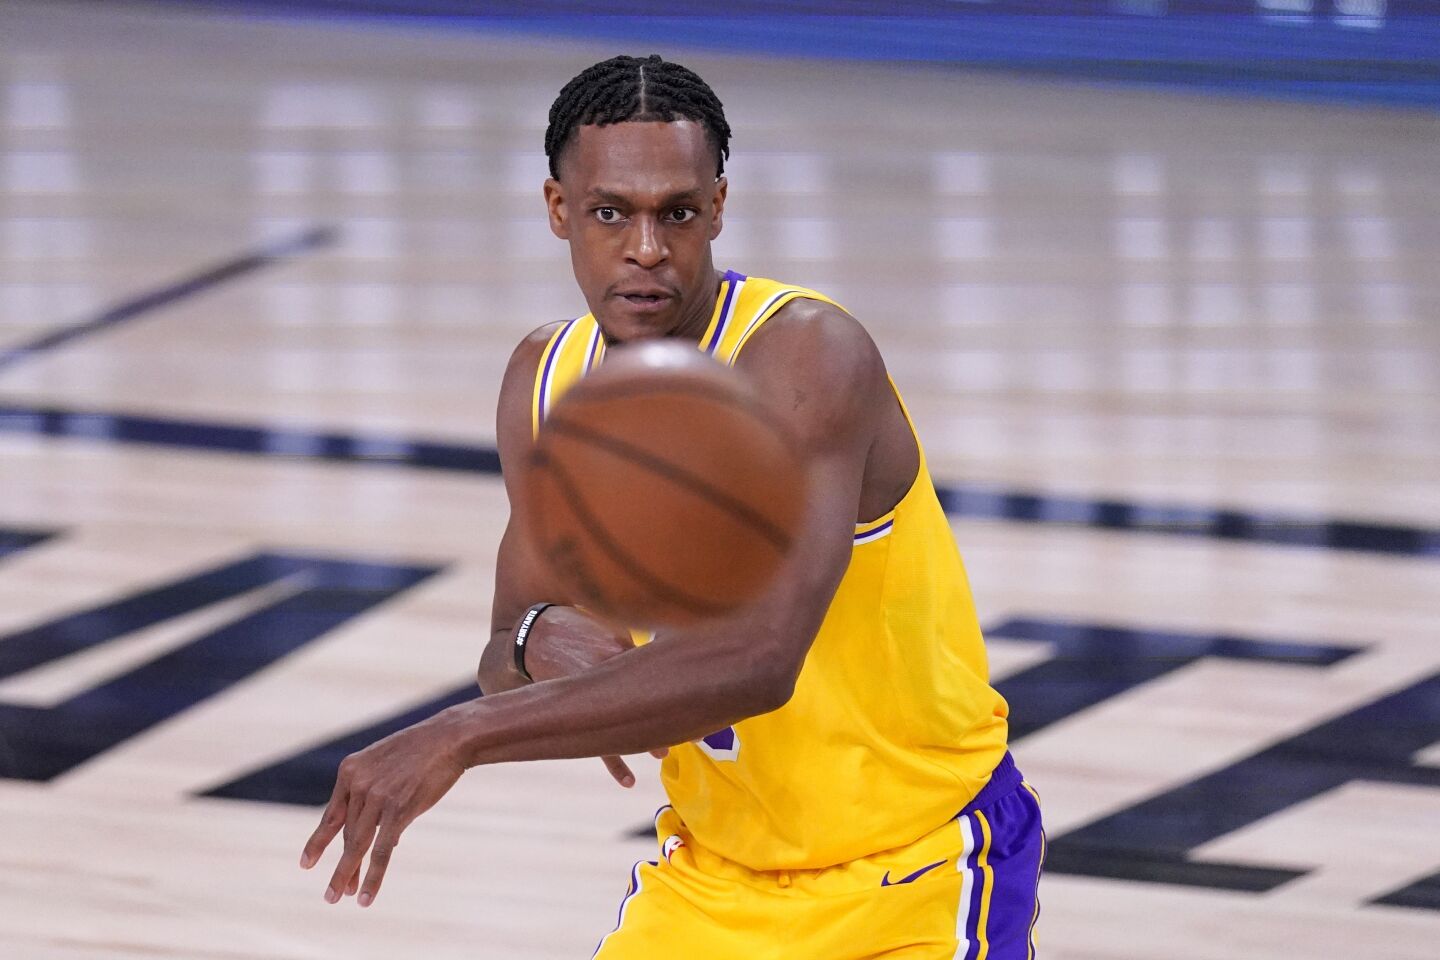 Lakers guard Rajon Rondo whips a pass to a teammate during Game 1.